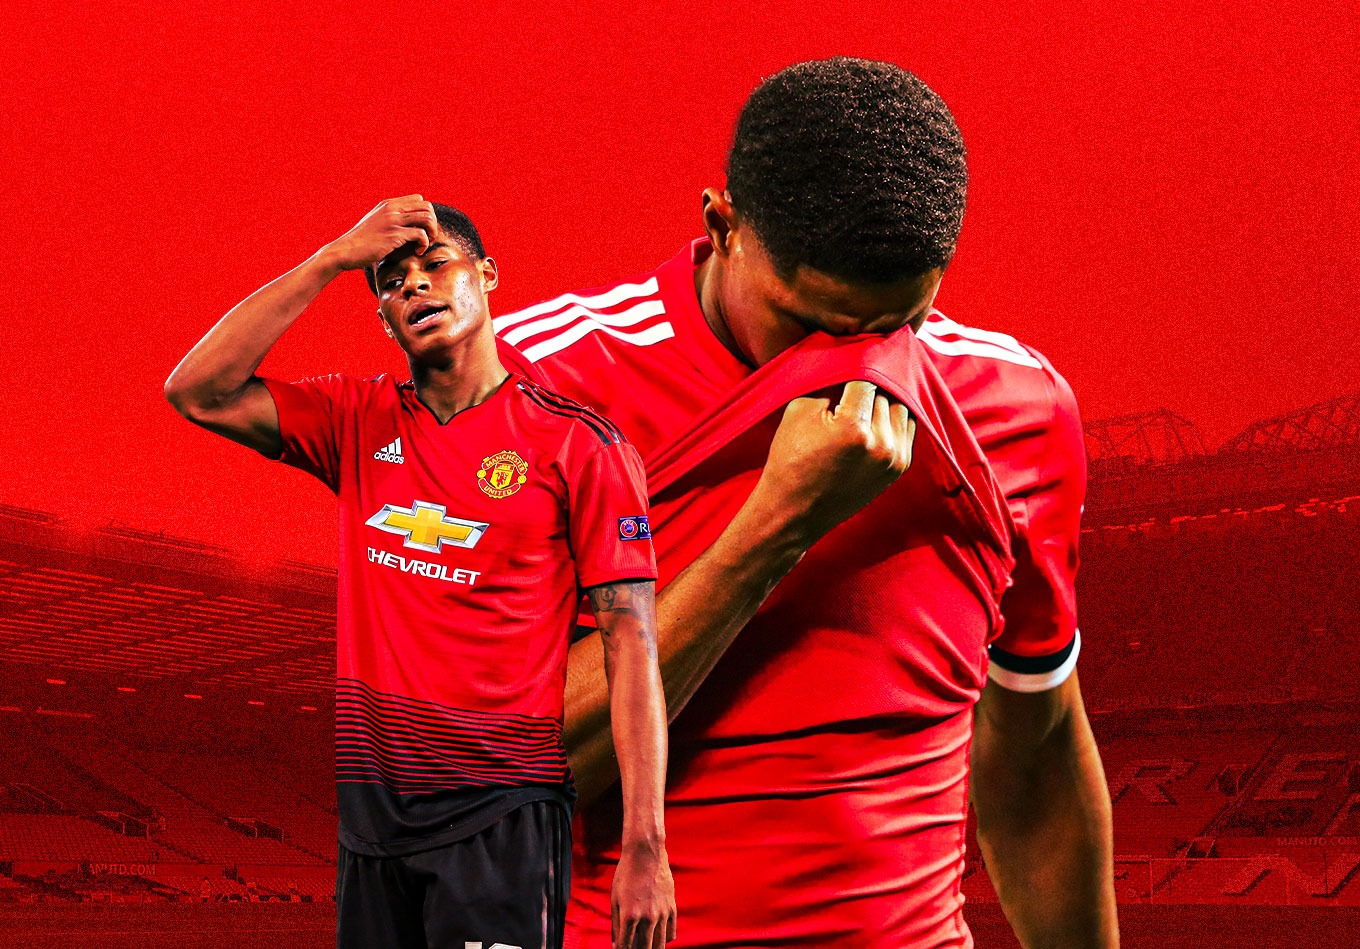 The Rashford Files: Manchester United's Mr Endeavour Is Trying Hard, but It's Not Working Right Now